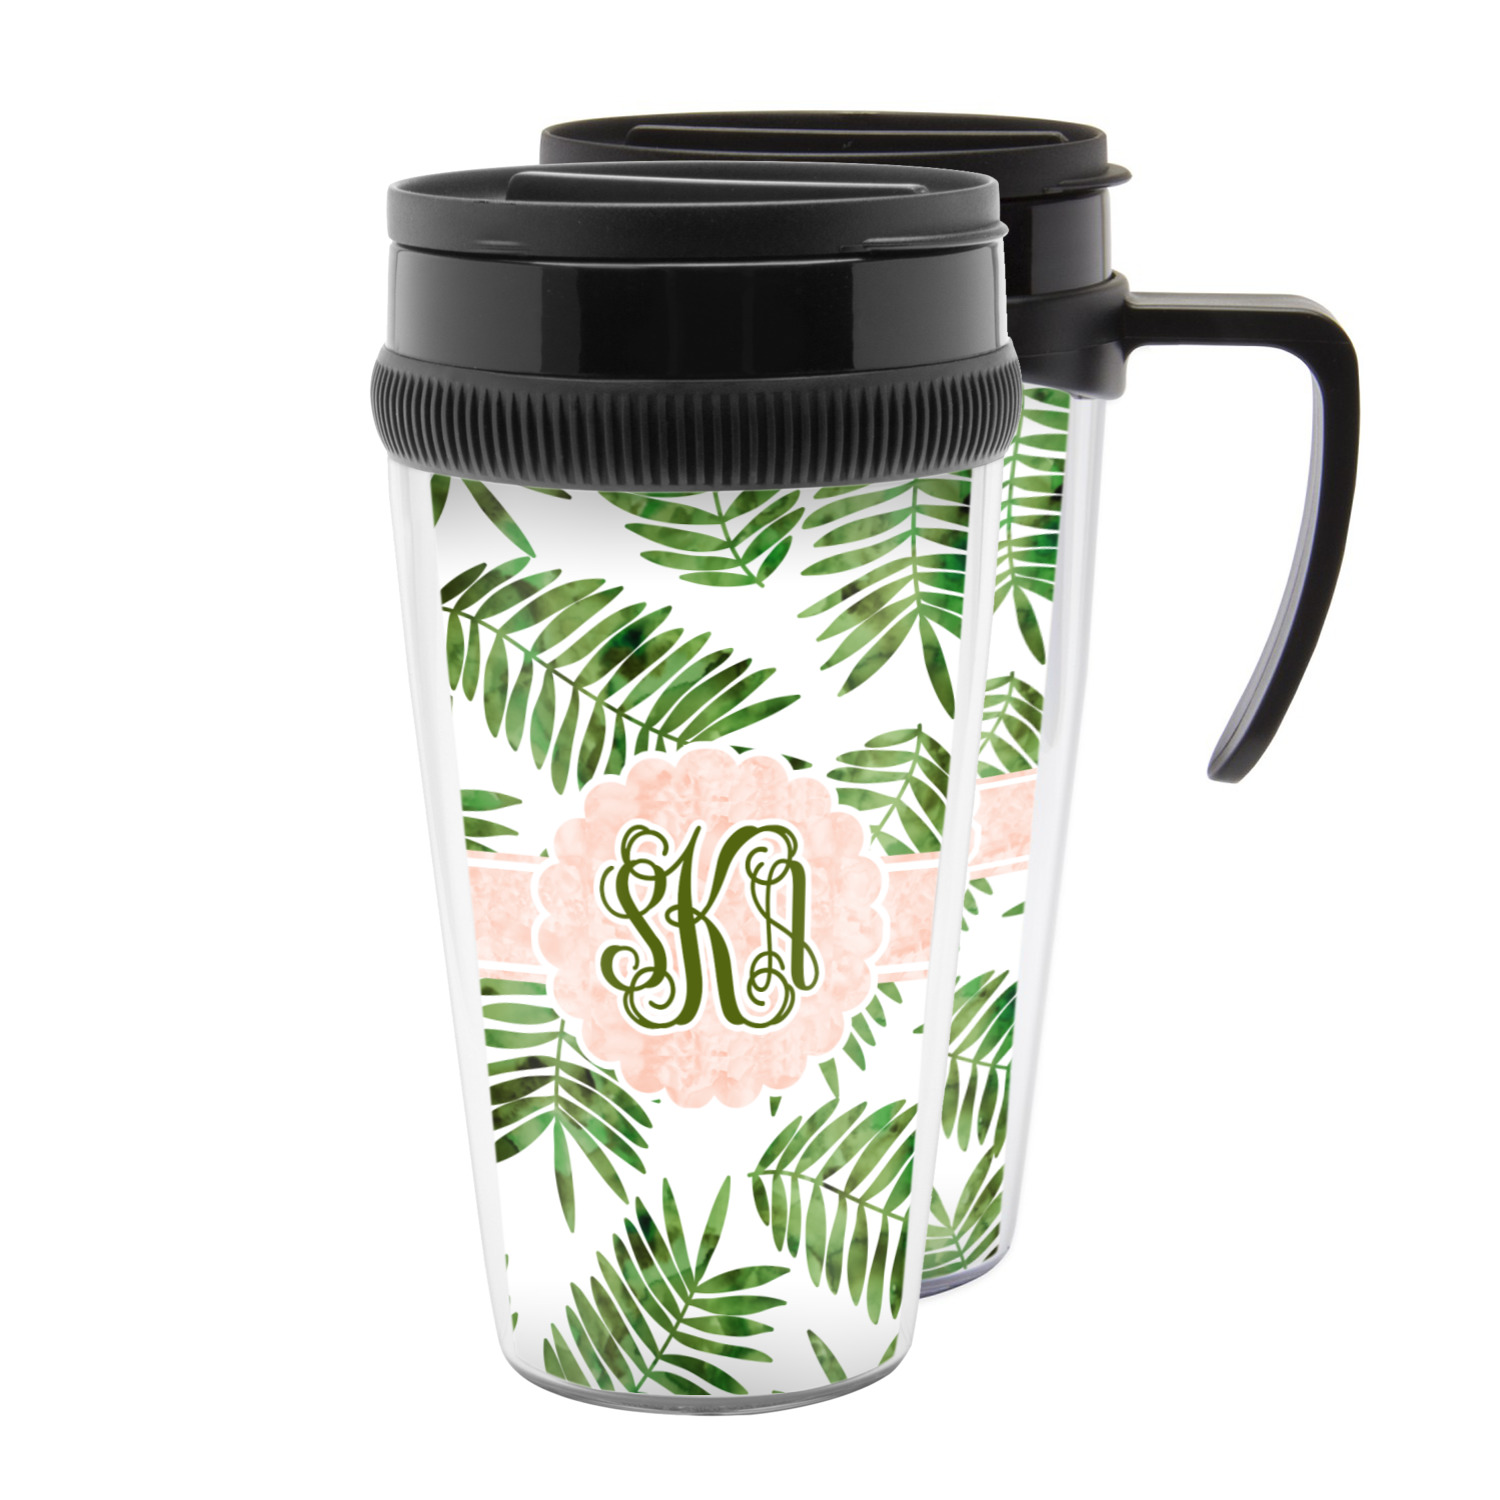 https://www.youcustomizeit.com/common/MAKE/1107877/Tropical-Leaves-Acrylic-Travel-Mugs.jpg?lm=1595603647